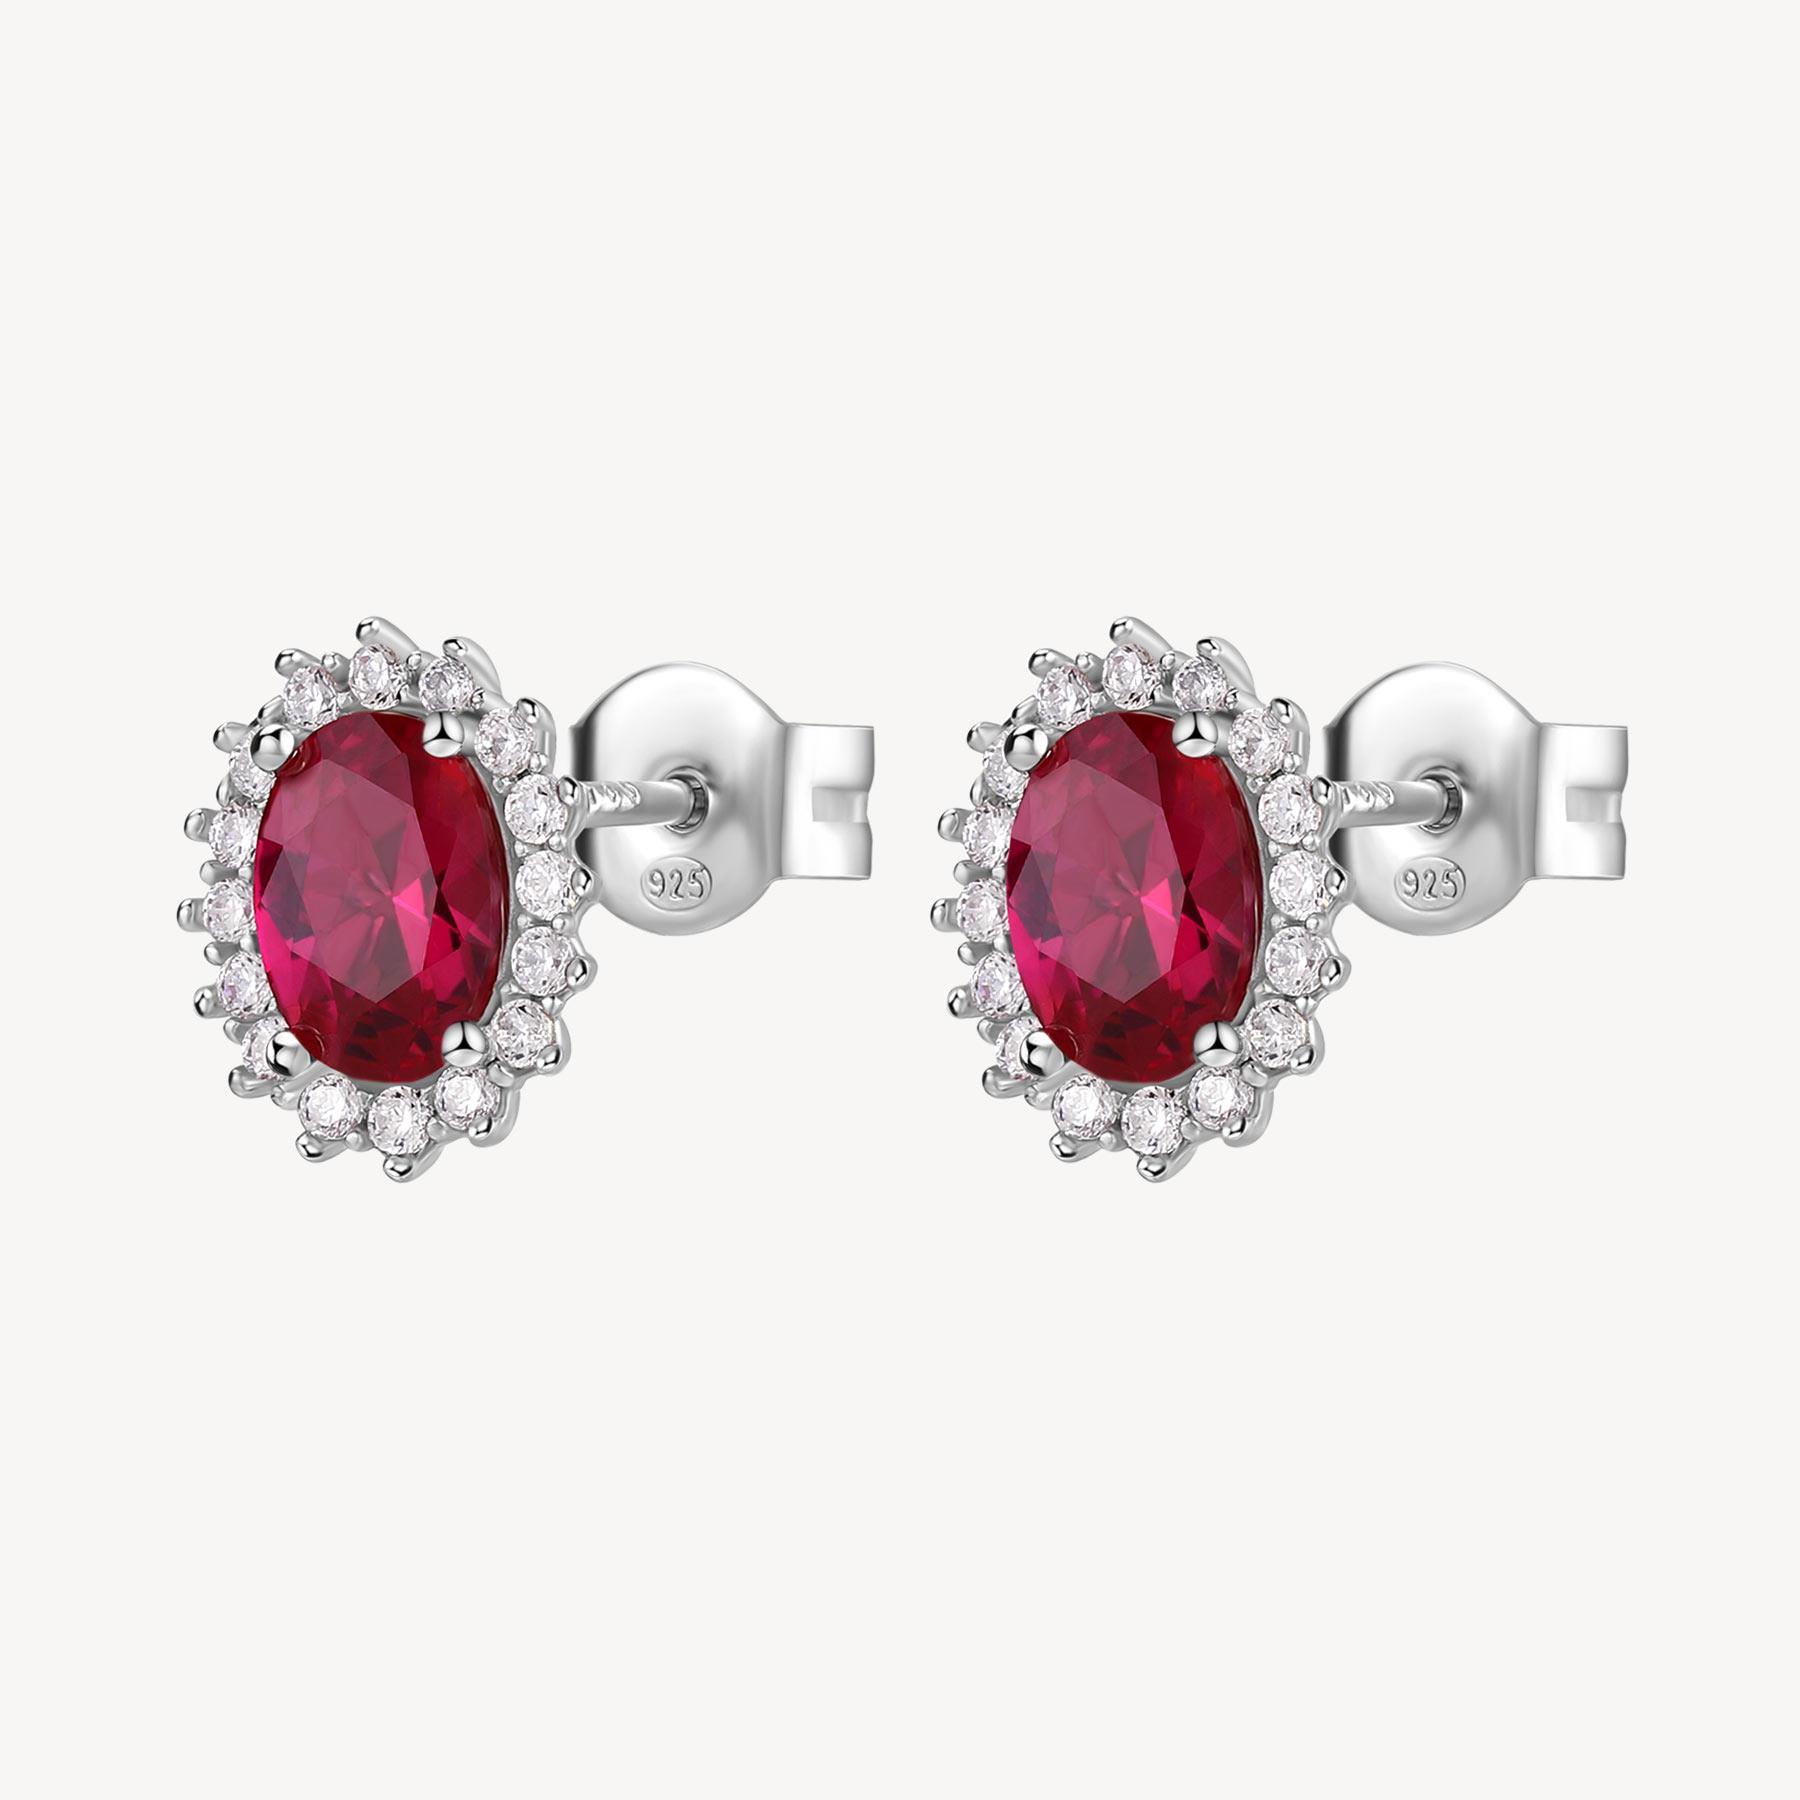 Lobe earrings surrounded by silver with fuchsia stone and zircons - ORO&CO 925